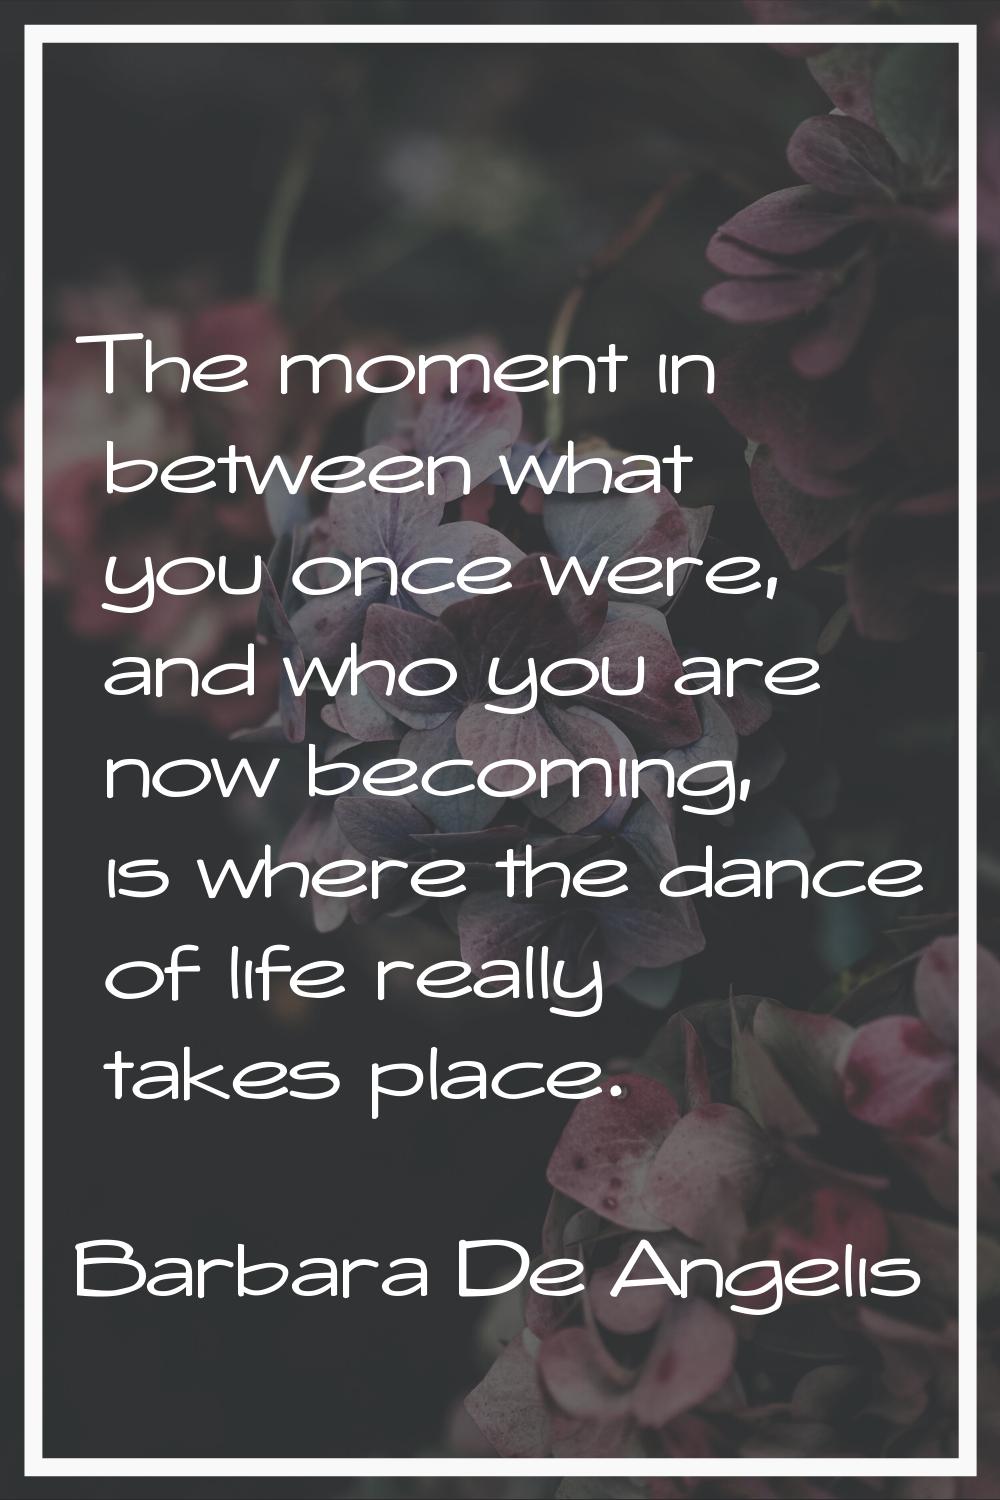 The moment in between what you once were, and who you are now becoming, is where the dance of life 